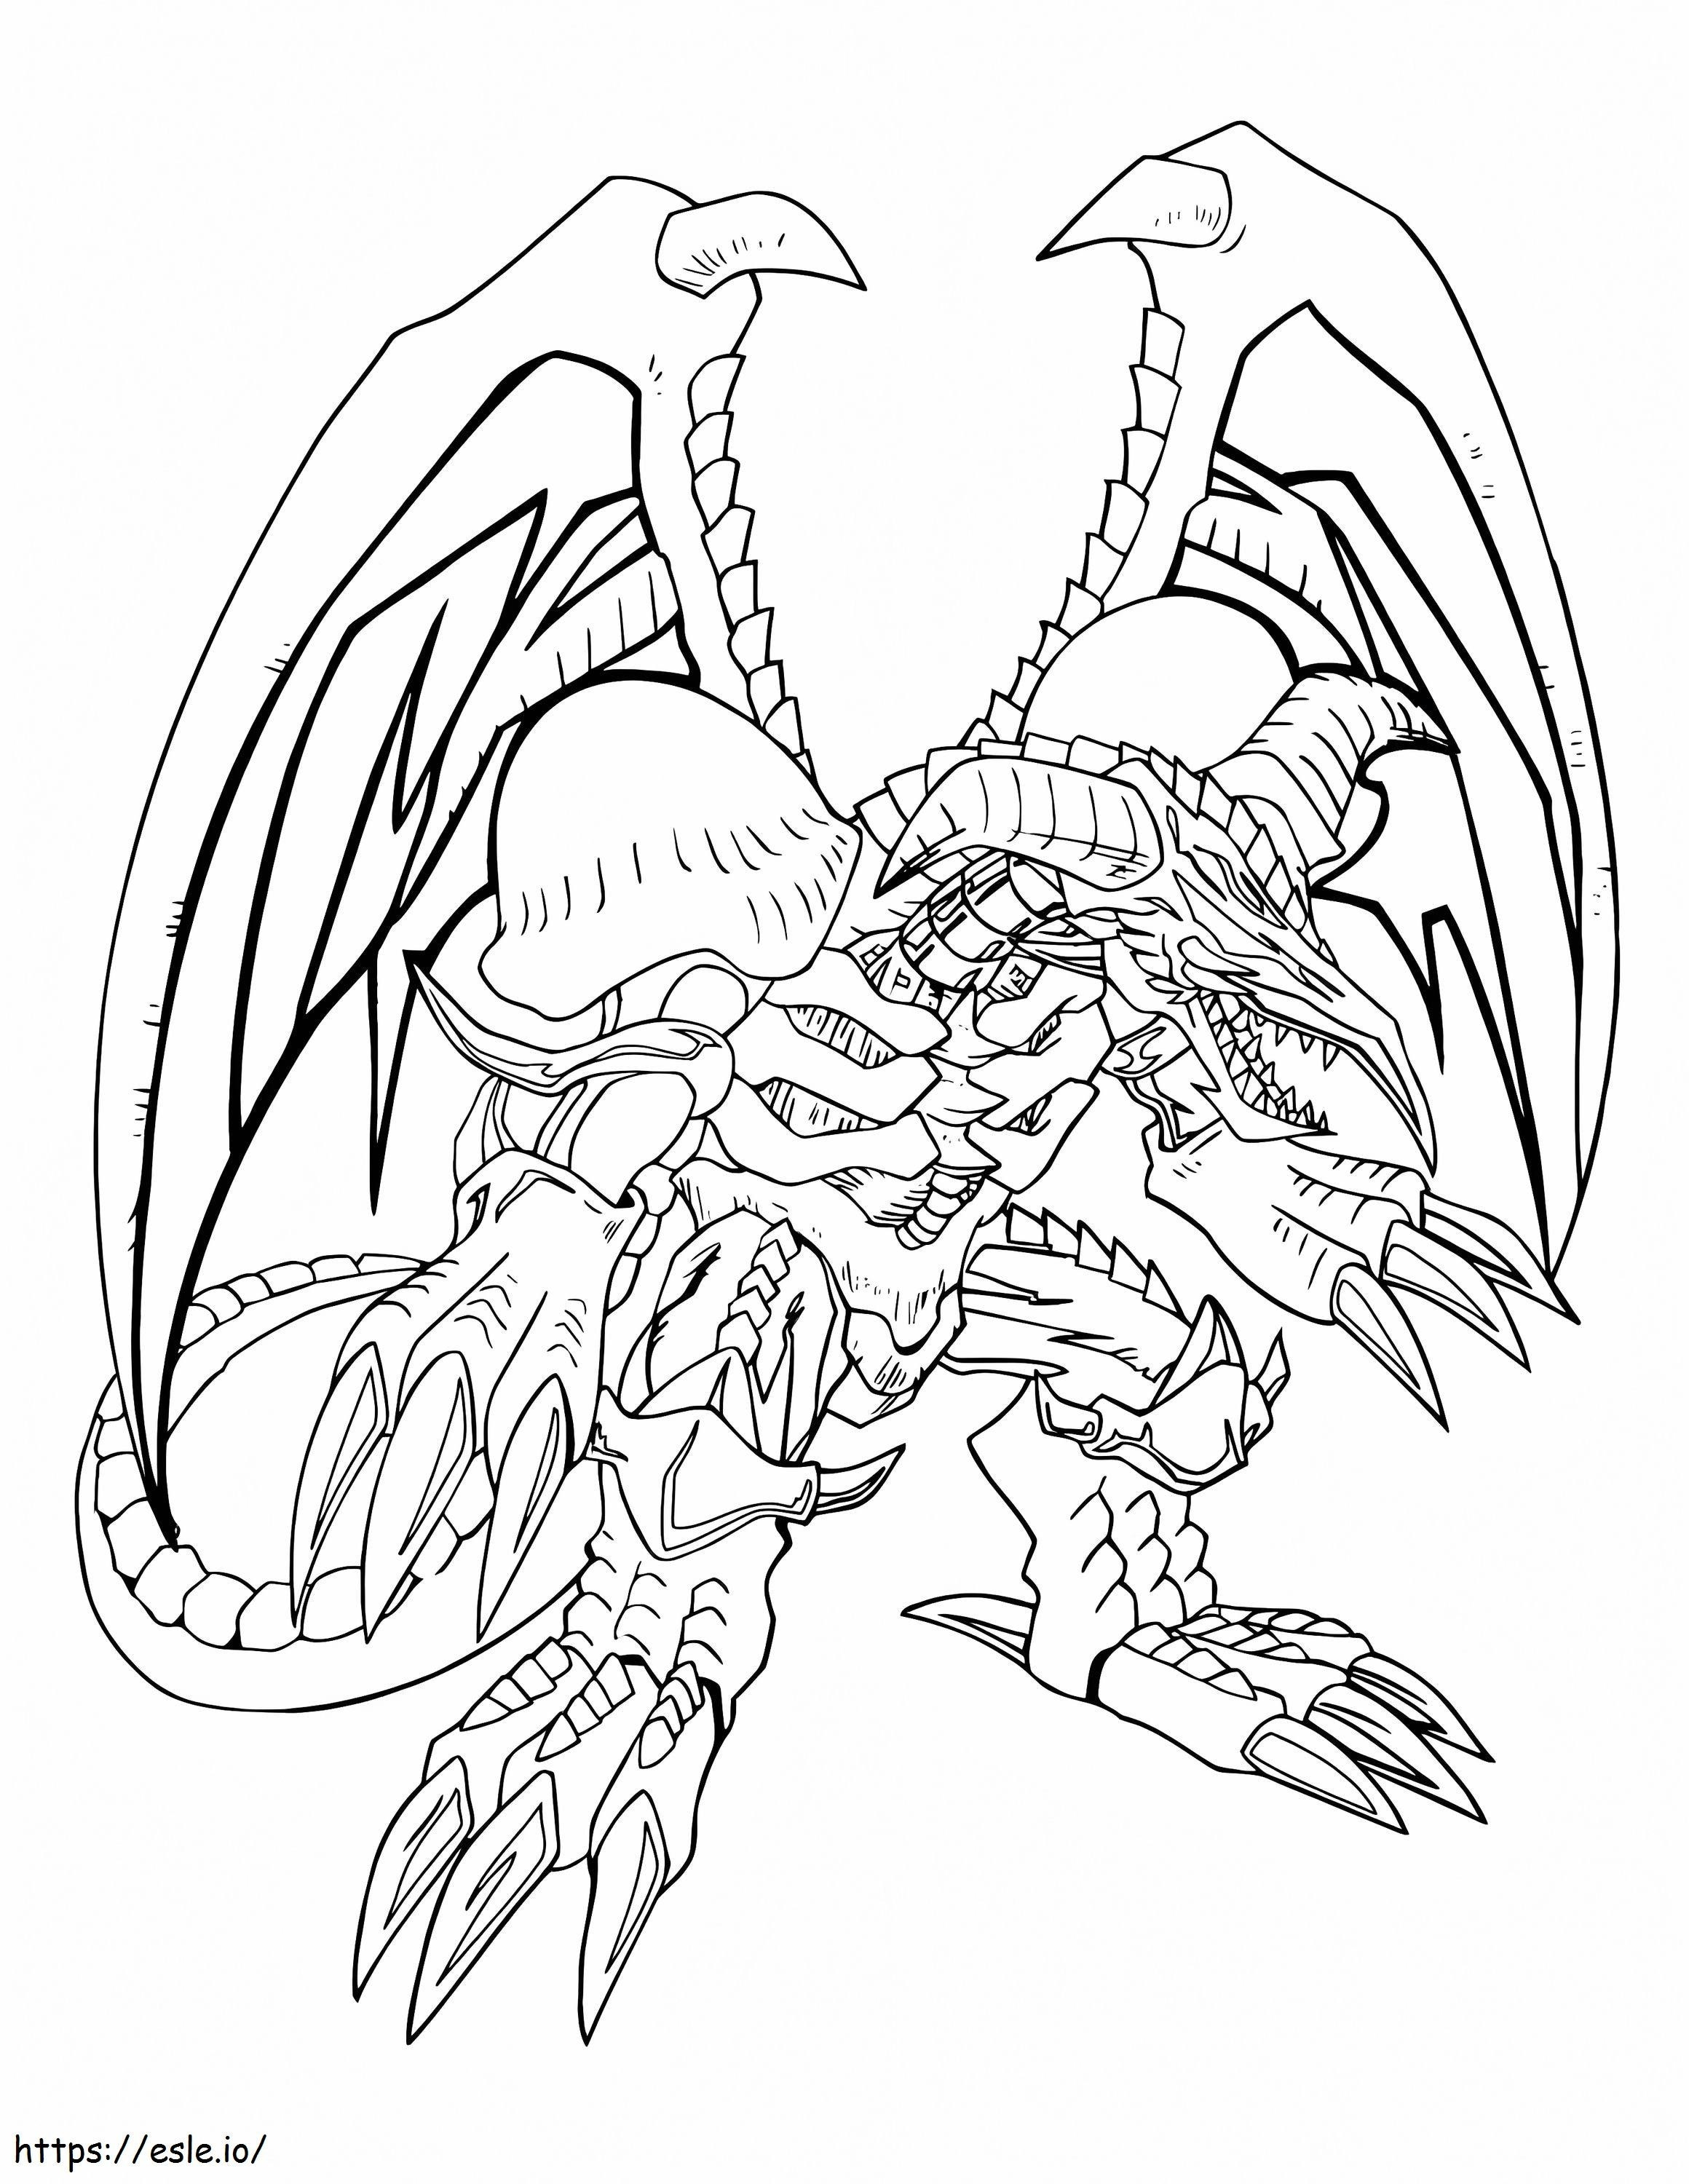 Yu Gi Oh 17 coloring page